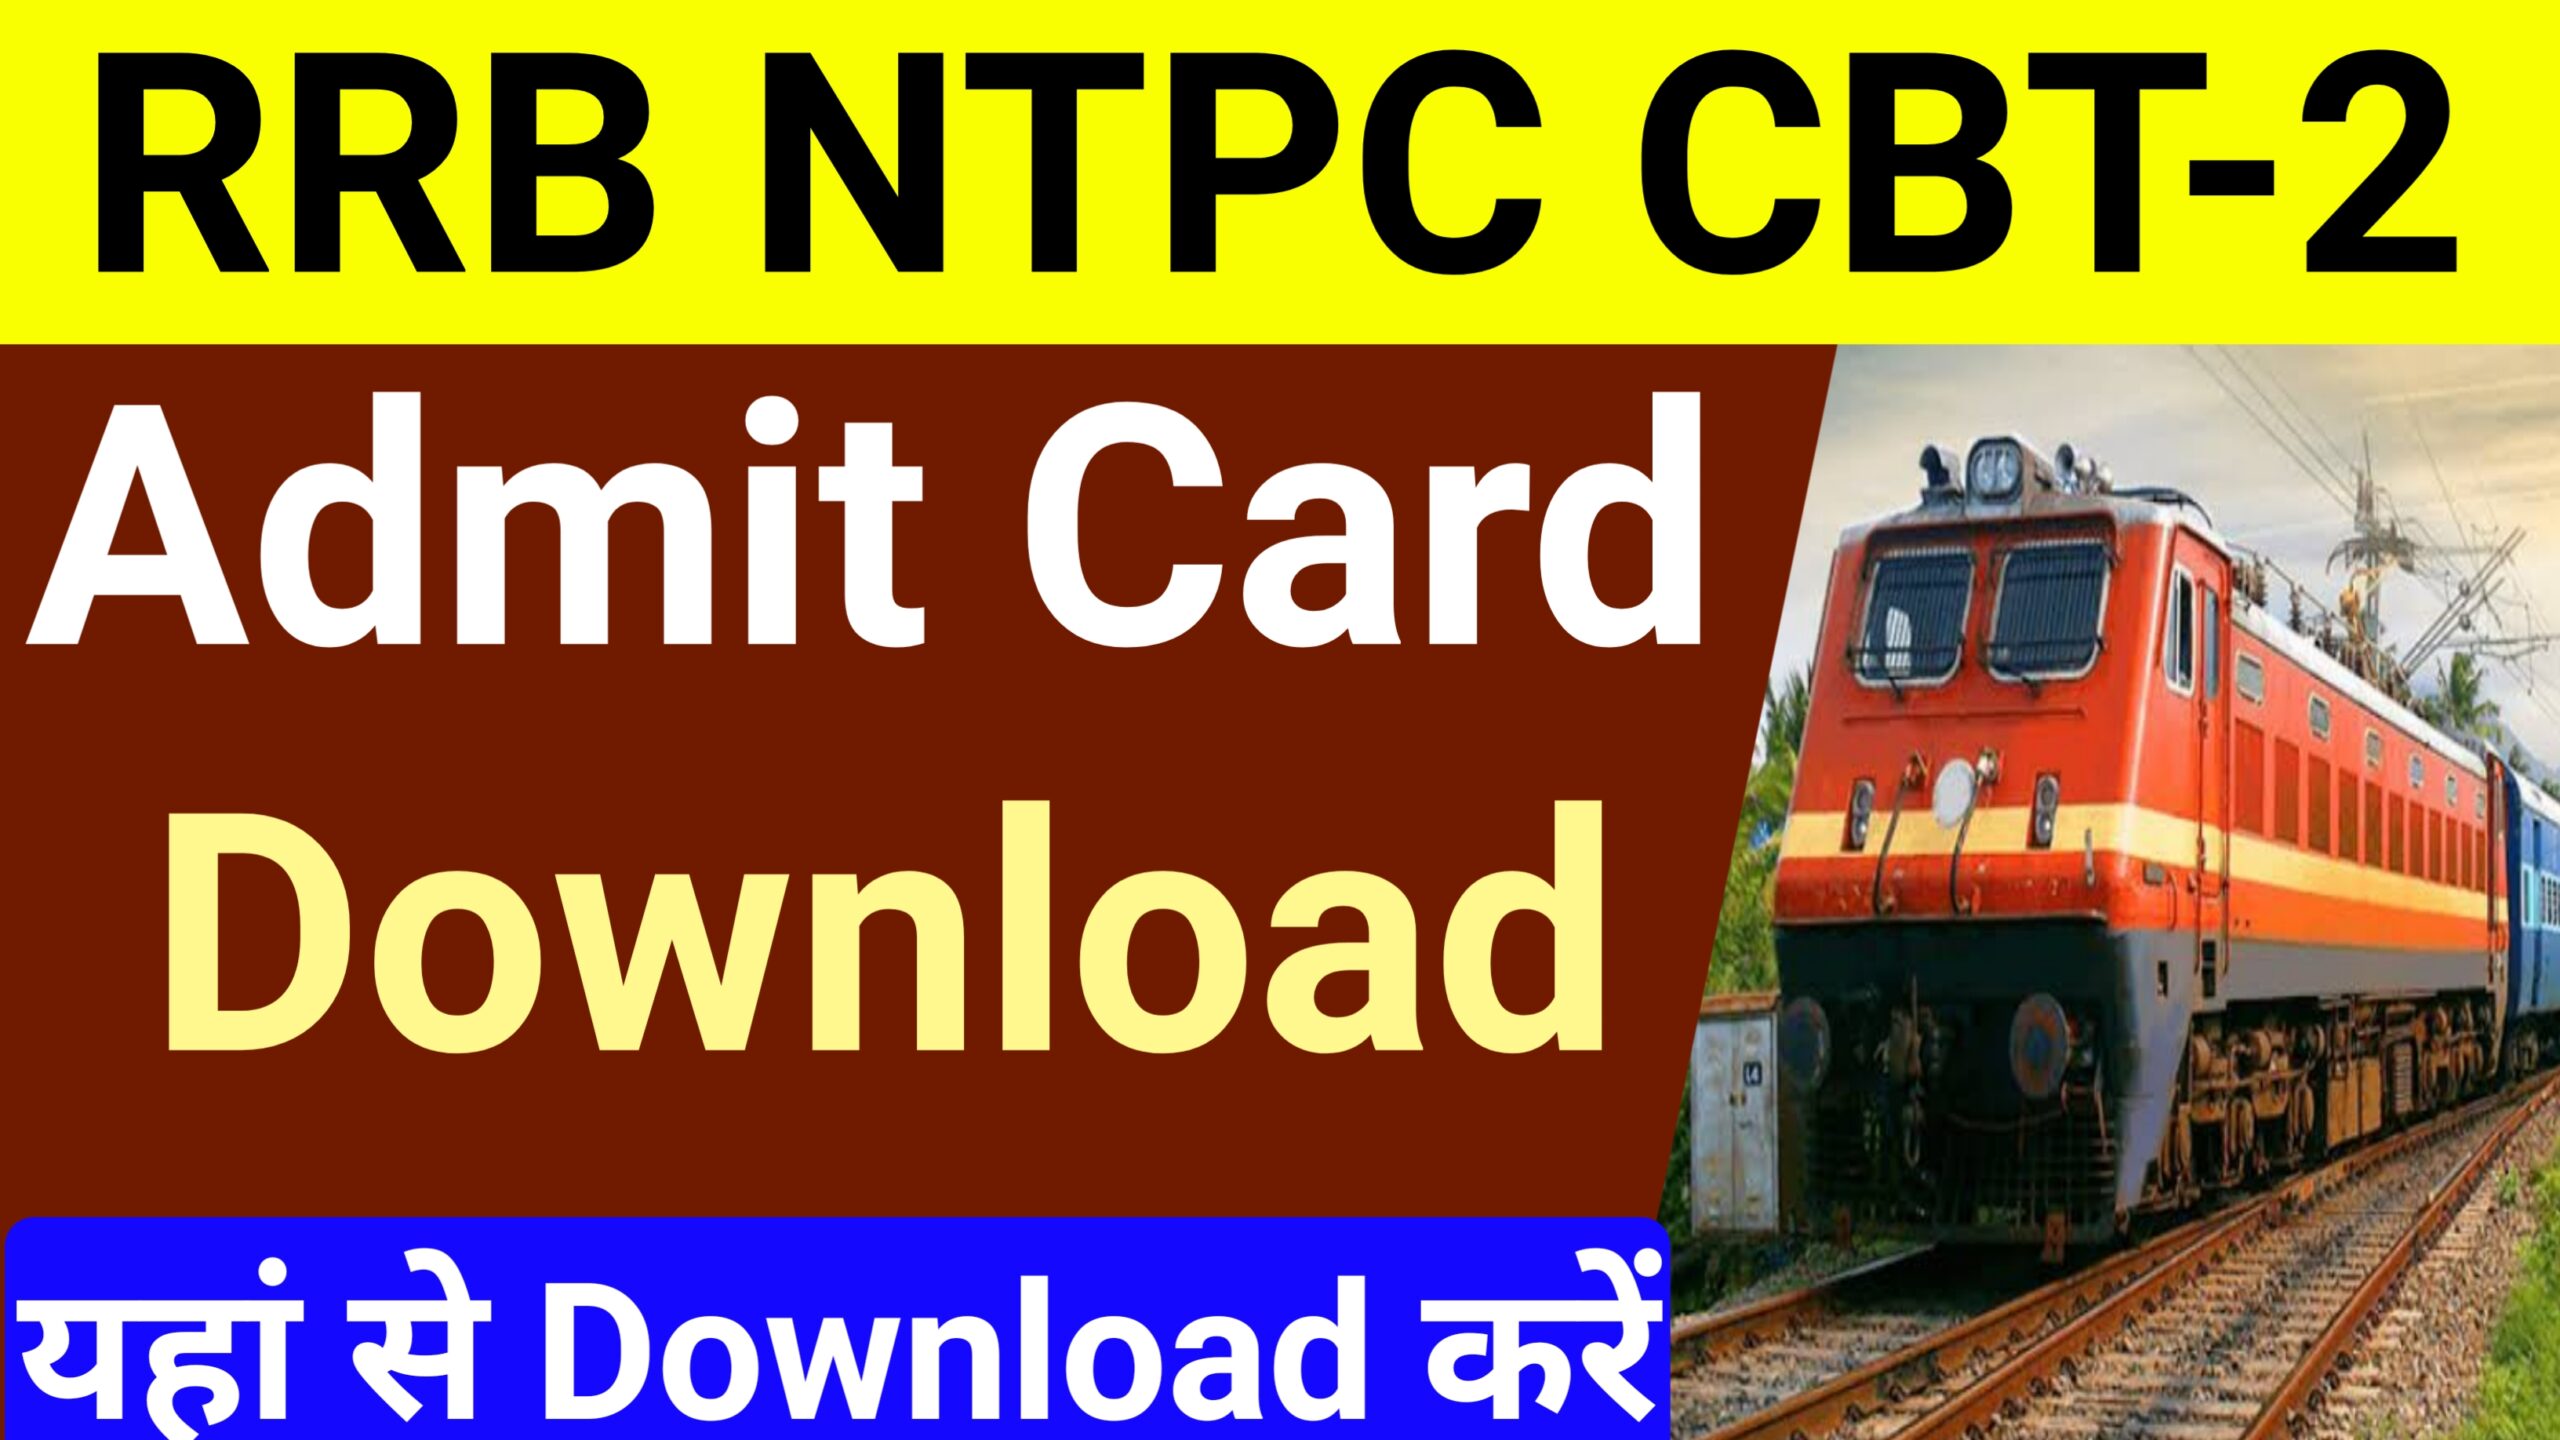 RRB NTPC Admit Card 2021-22: Download CBT 2 Hall Ticket Here?